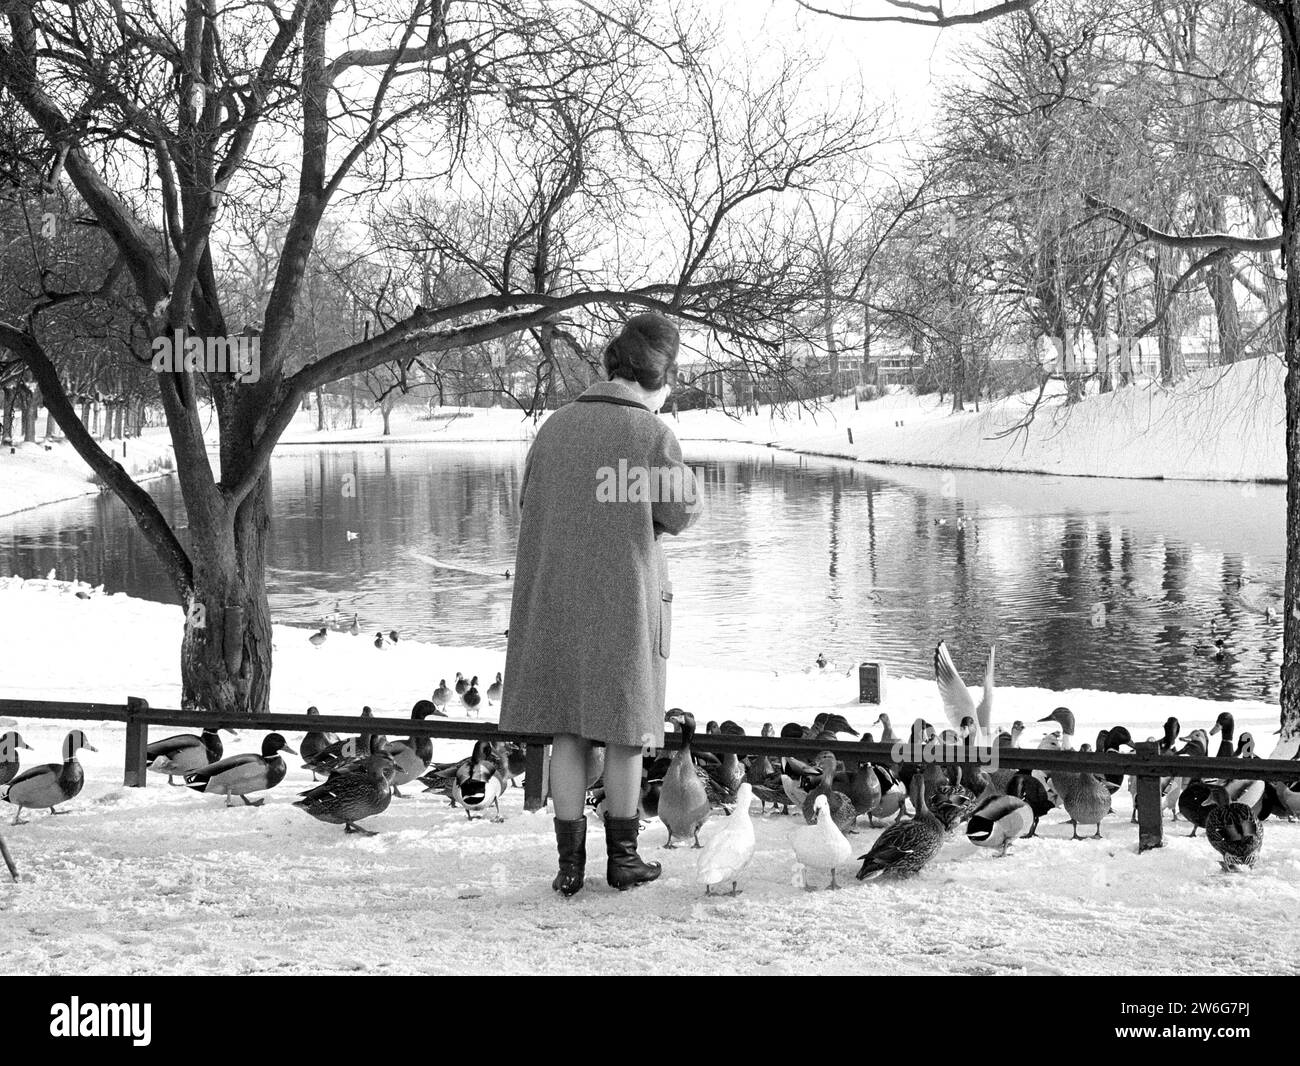 Friesland is preparing for the Elfstedentocht, Woman feeds ducks in the Prinsentuin in Leeuwarden ca. January 14, 1963 Stock Photo